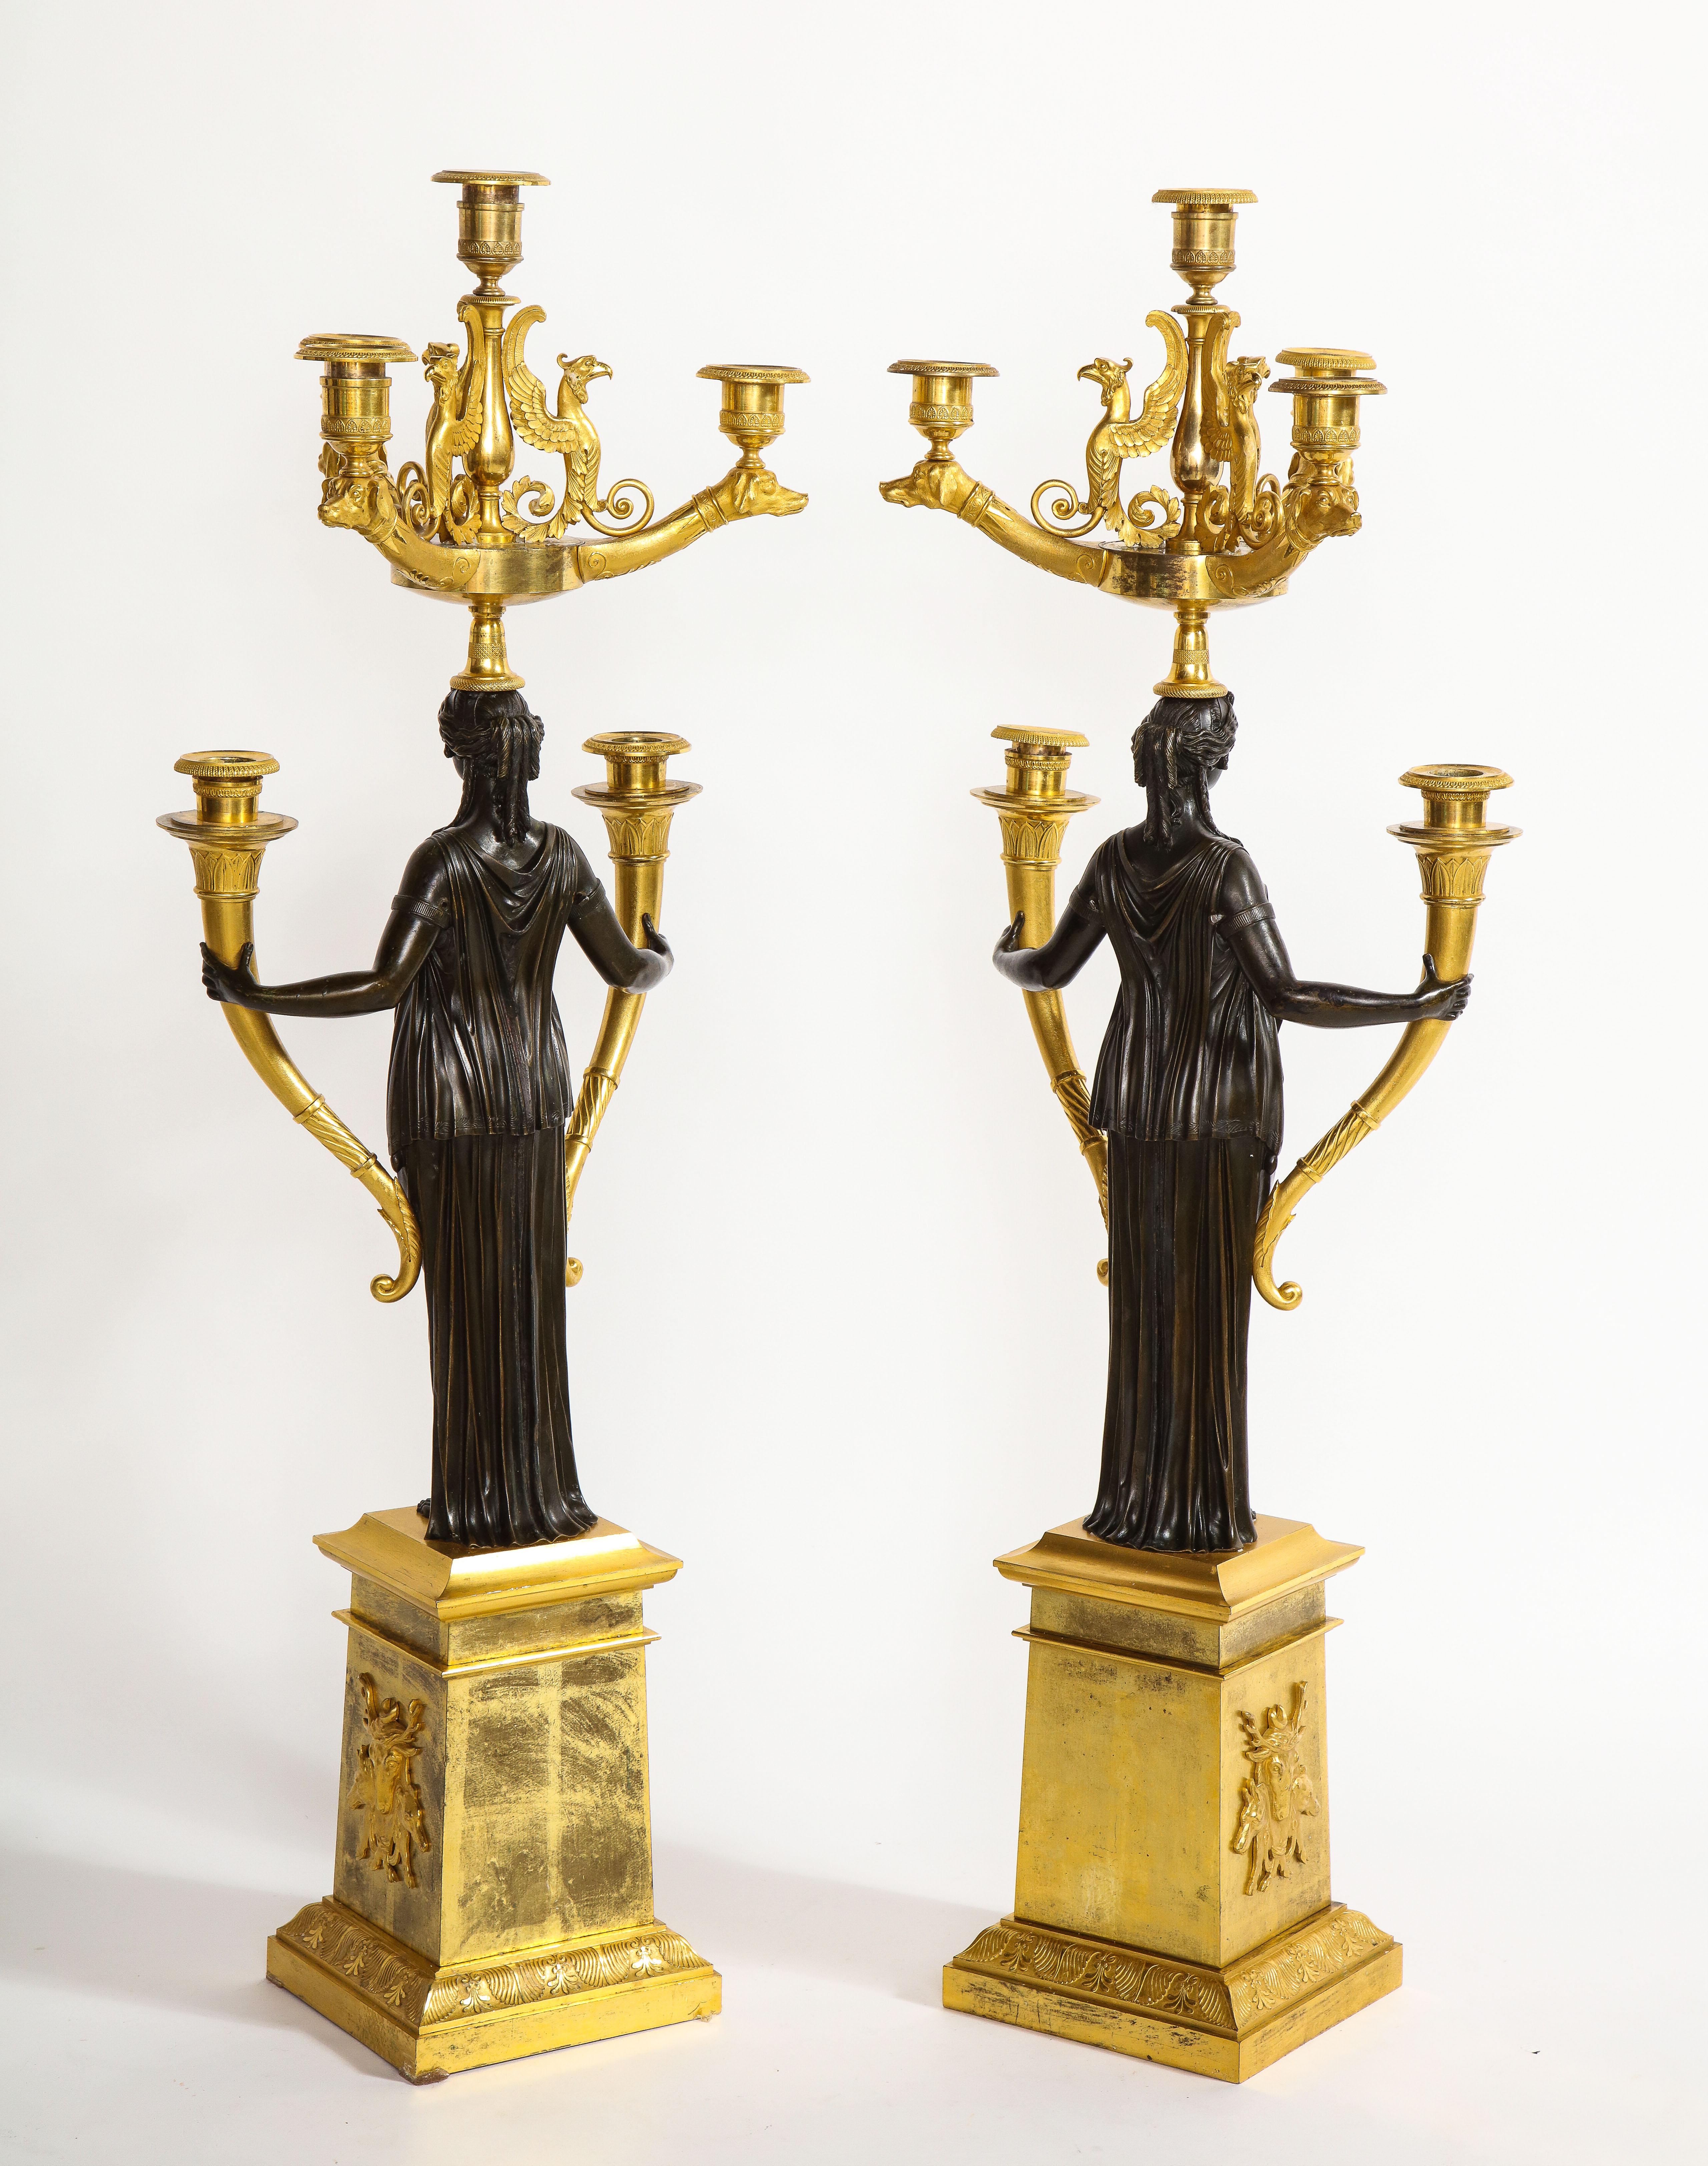 Gilt Important Pair of 1st Period French Empire Pat. & Dore Bronze 6-Light Candelabra For Sale